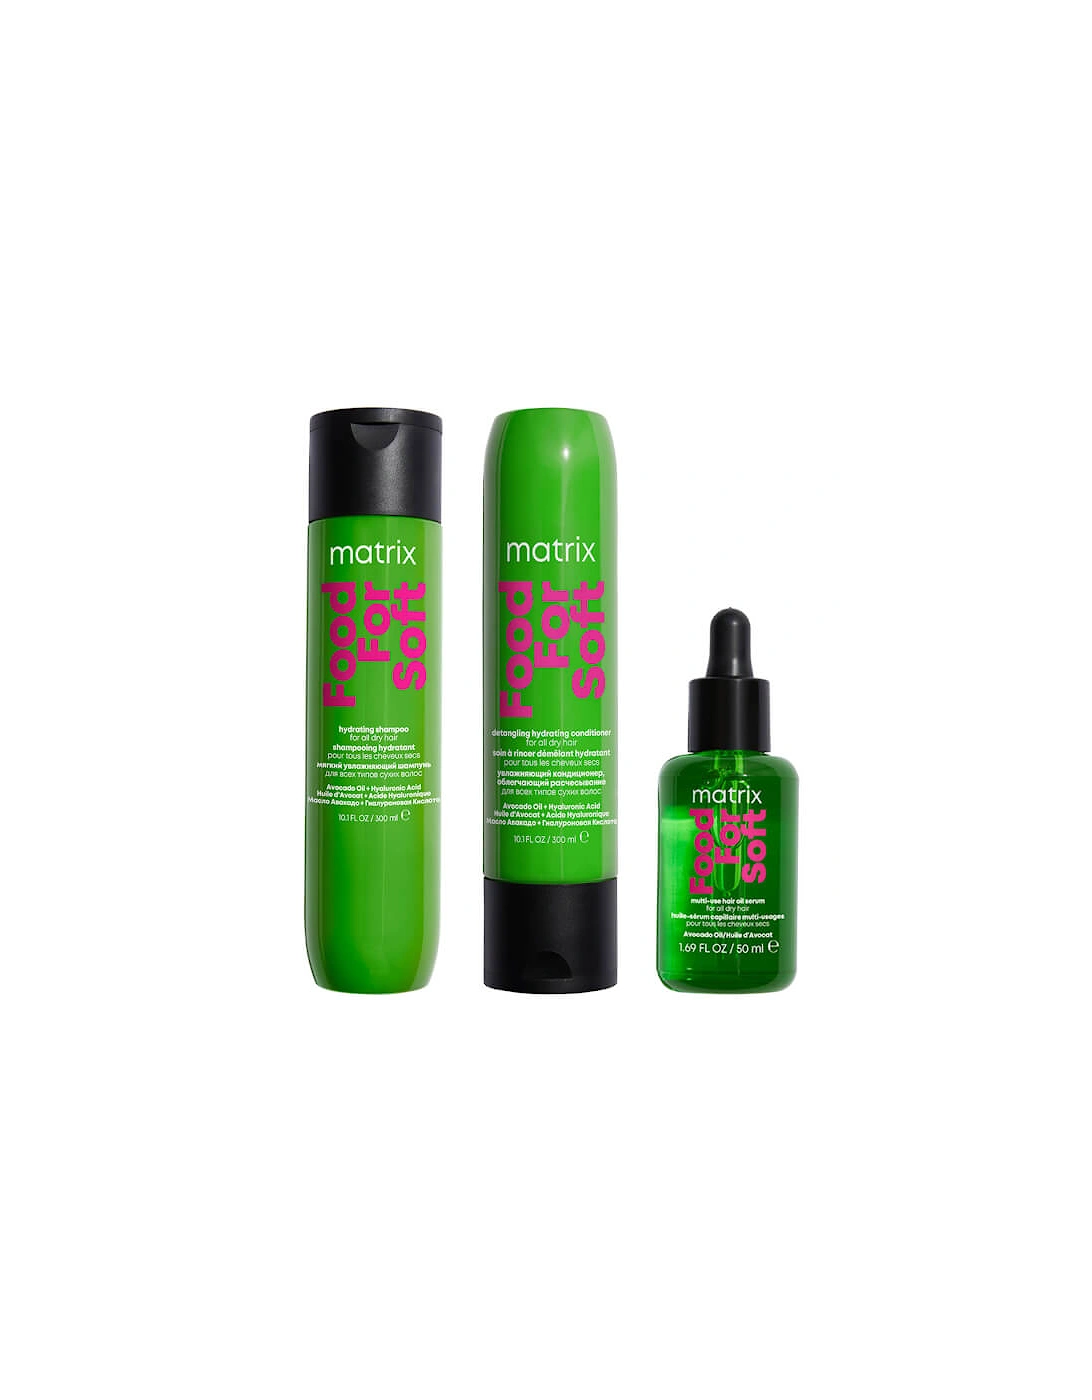 Food for Soft Hydrating Shampoo, Conditioner and Hair Oil with Avocado Oil and Hyaluronic Acid for Dry Hair Routine, 2 of 1